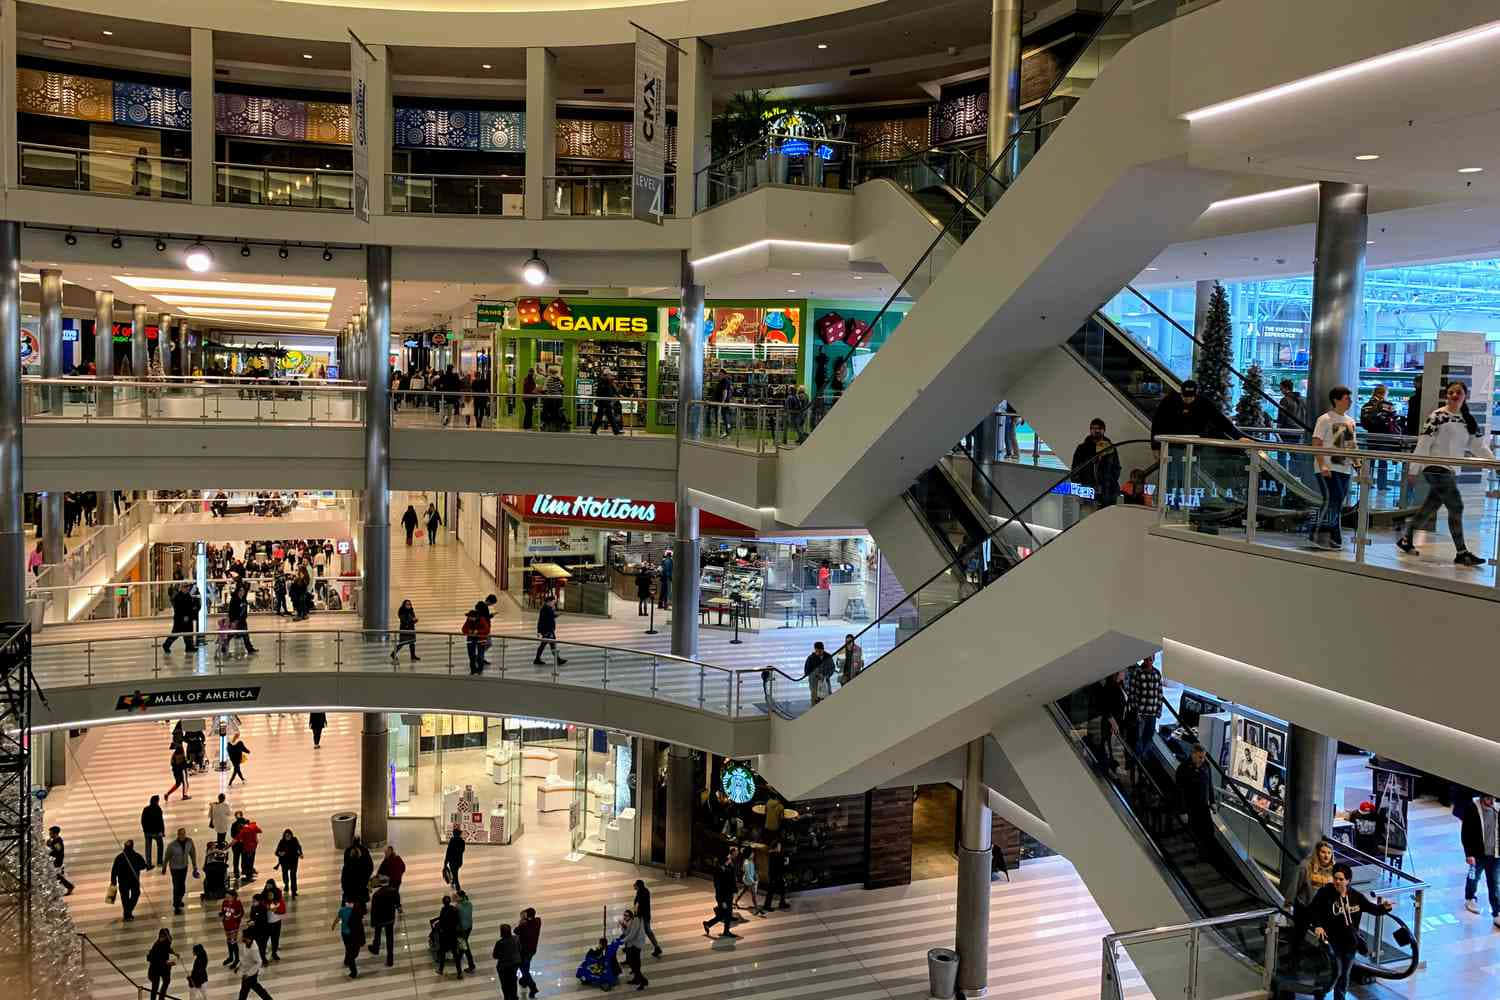 A bustling shopping mall with modern architecture and happy shoppers